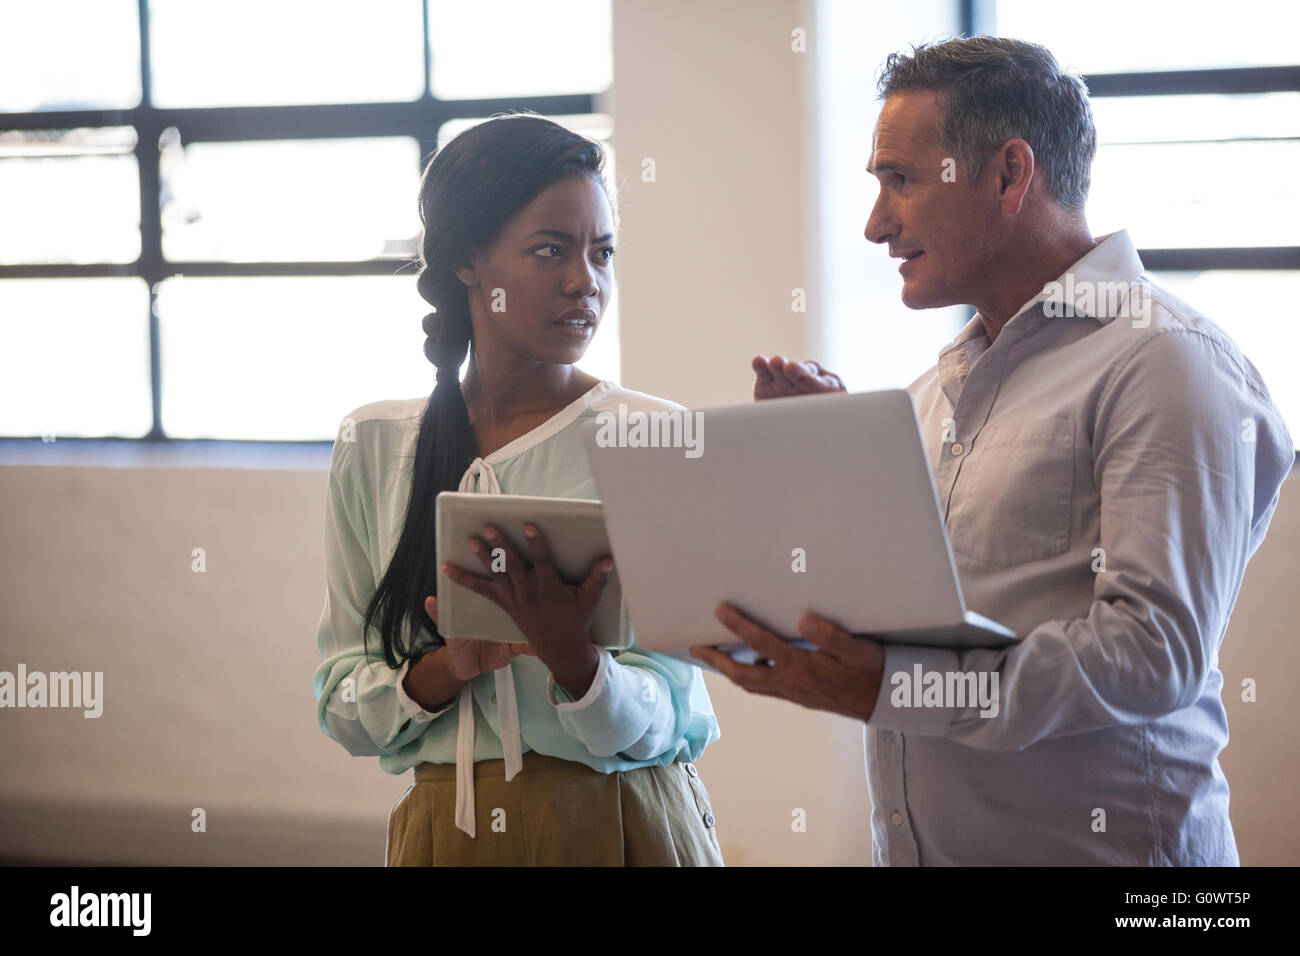 Two business people having a discussion Stock Photo